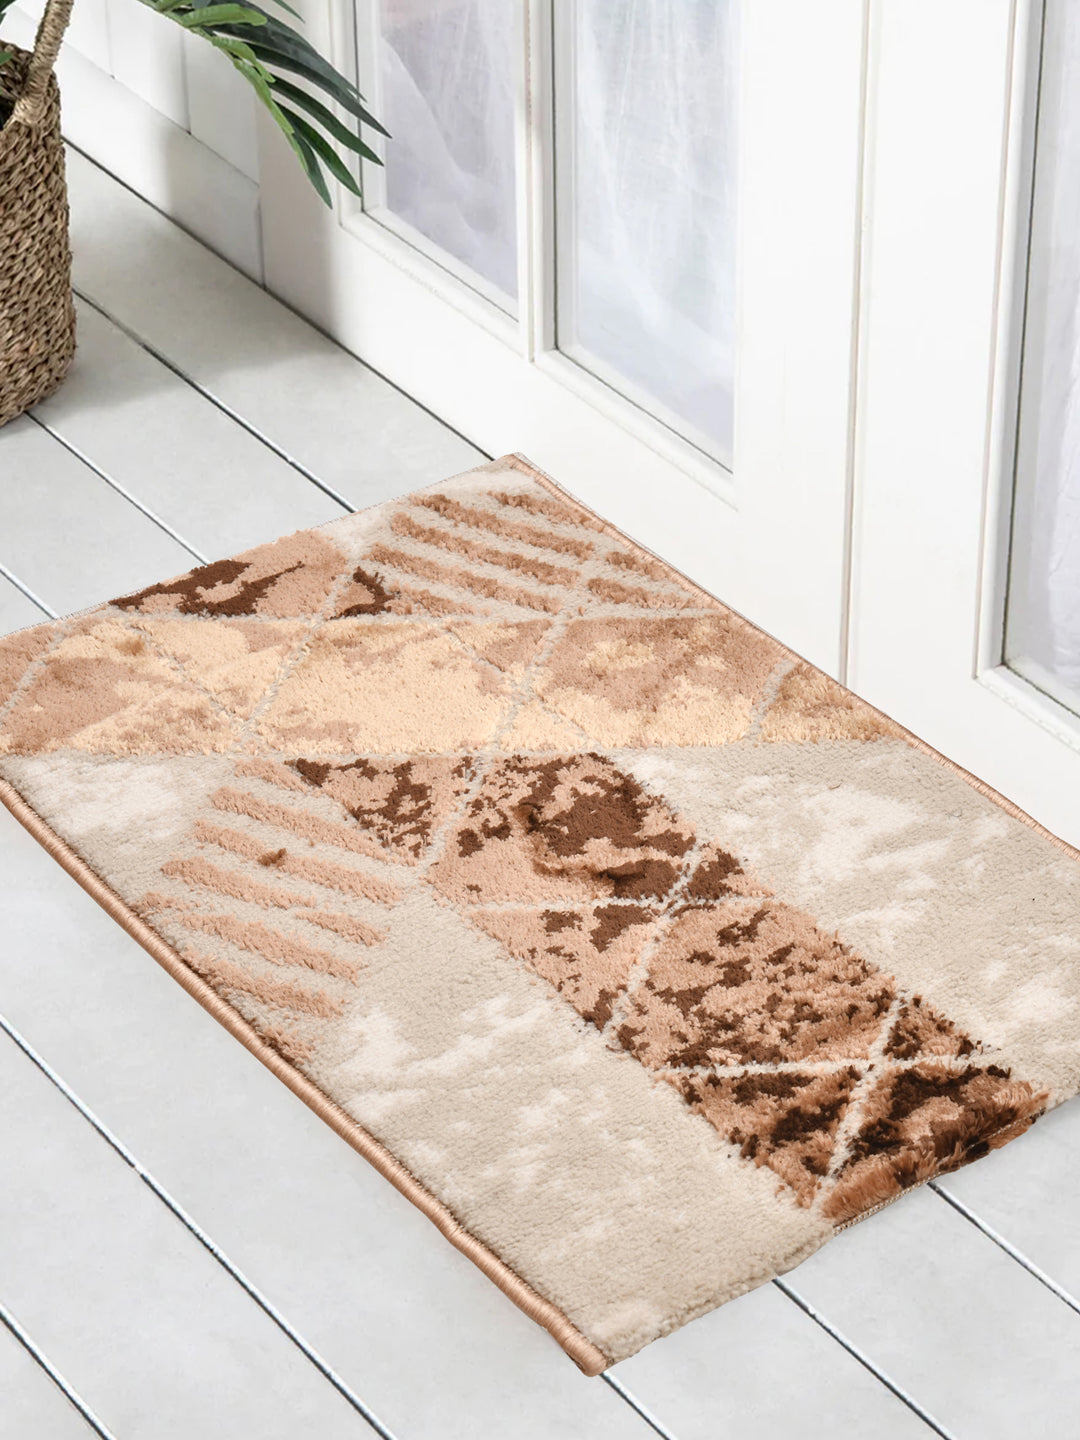 Doormat With Anti Skid Backing; 16x24 Inches; Brown Beige Geometric